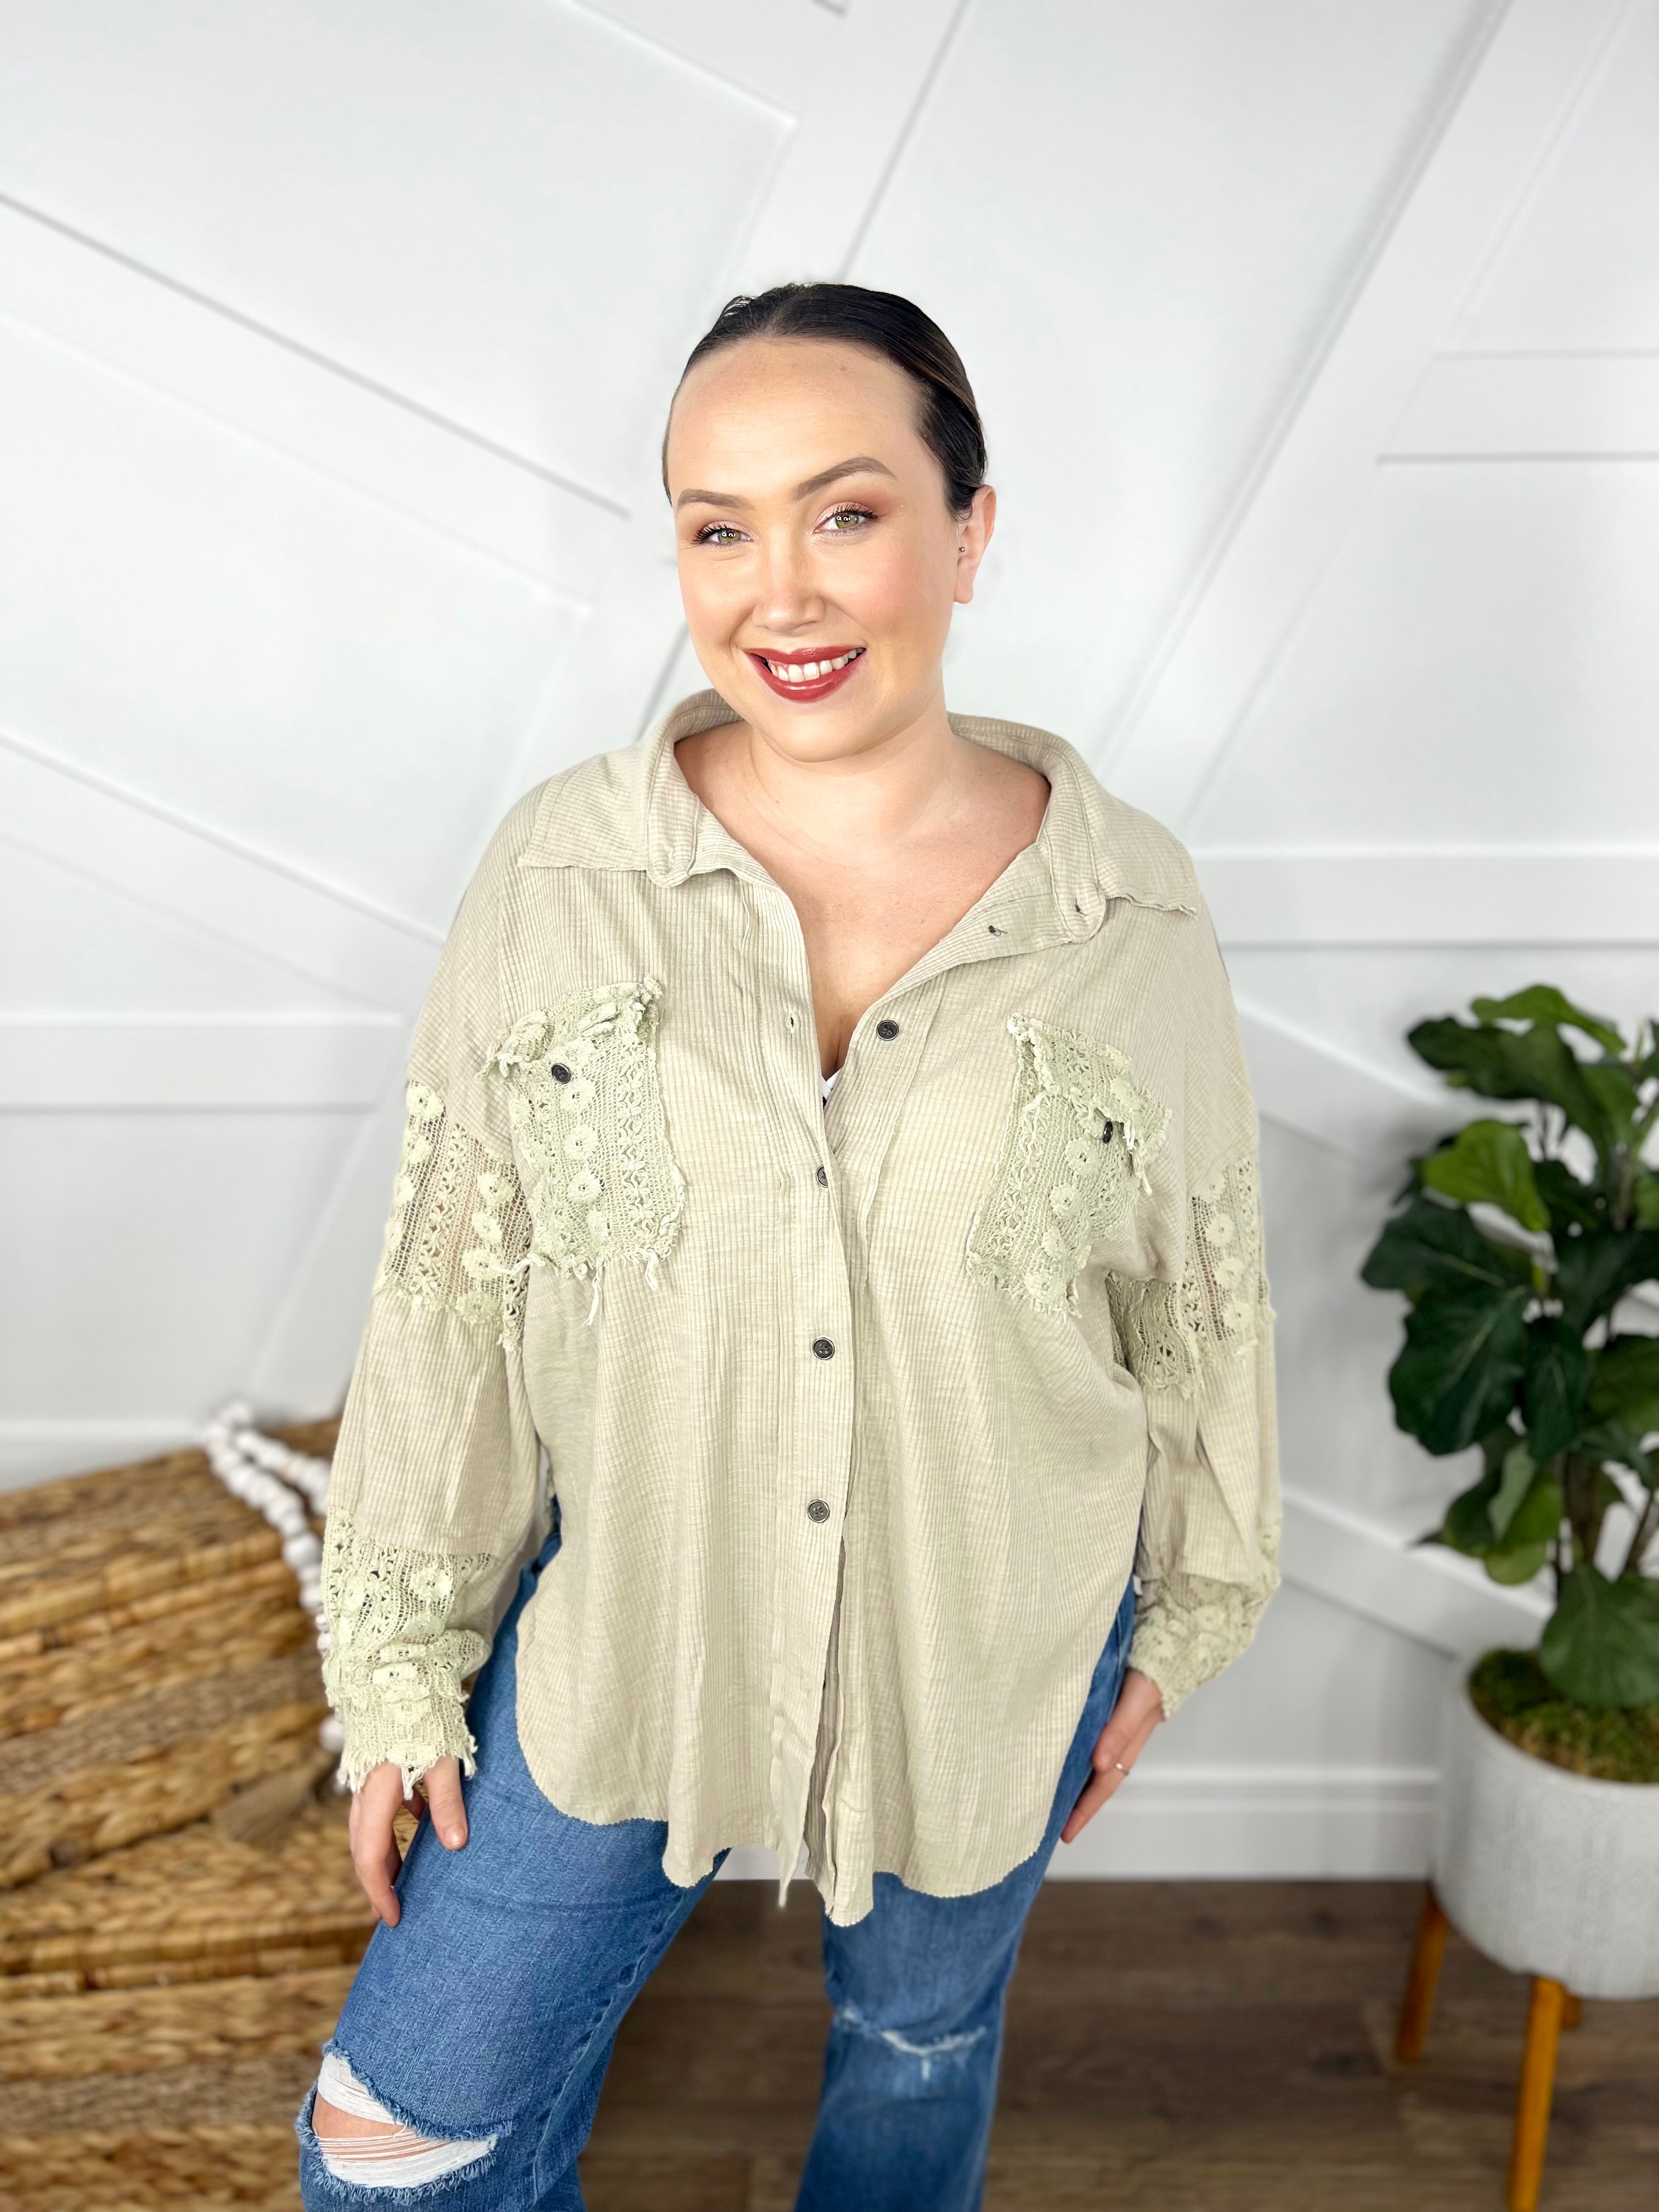 RESTOCK : For Your Pleasure Button Down Top-120 Long Sleeve Tops-POL-Heathered Boho Boutique, Women's Fashion and Accessories in Palmetto, FL